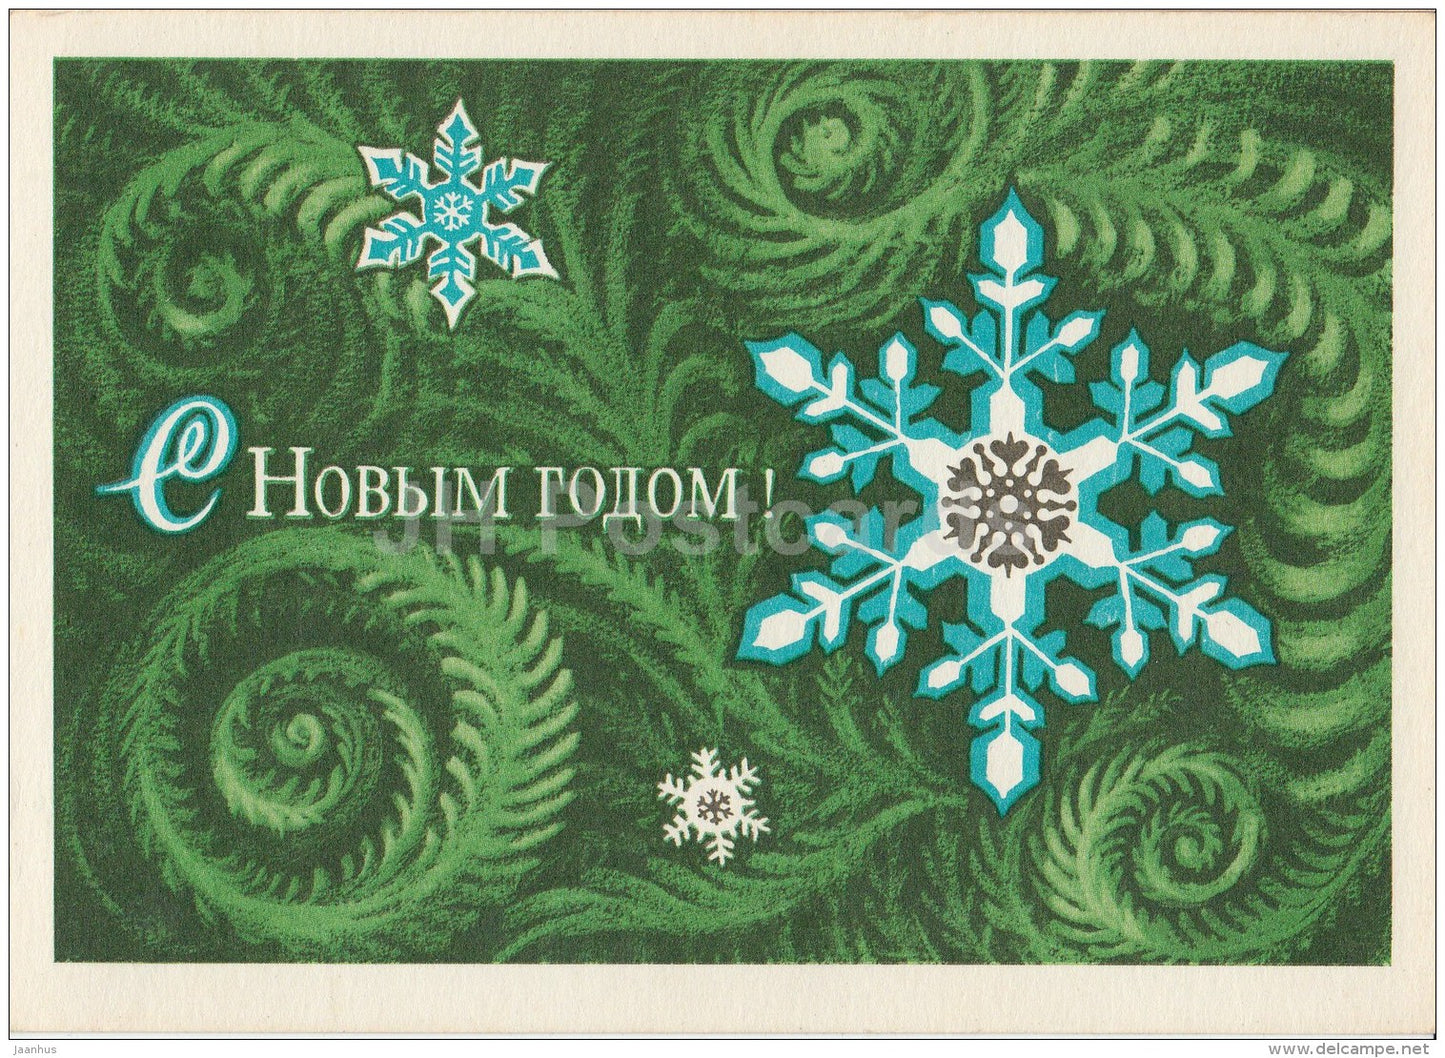 New Year Greeting Card by V. Martynov - snowflakes - 1974 - Russia USSR - used - JH Postcards